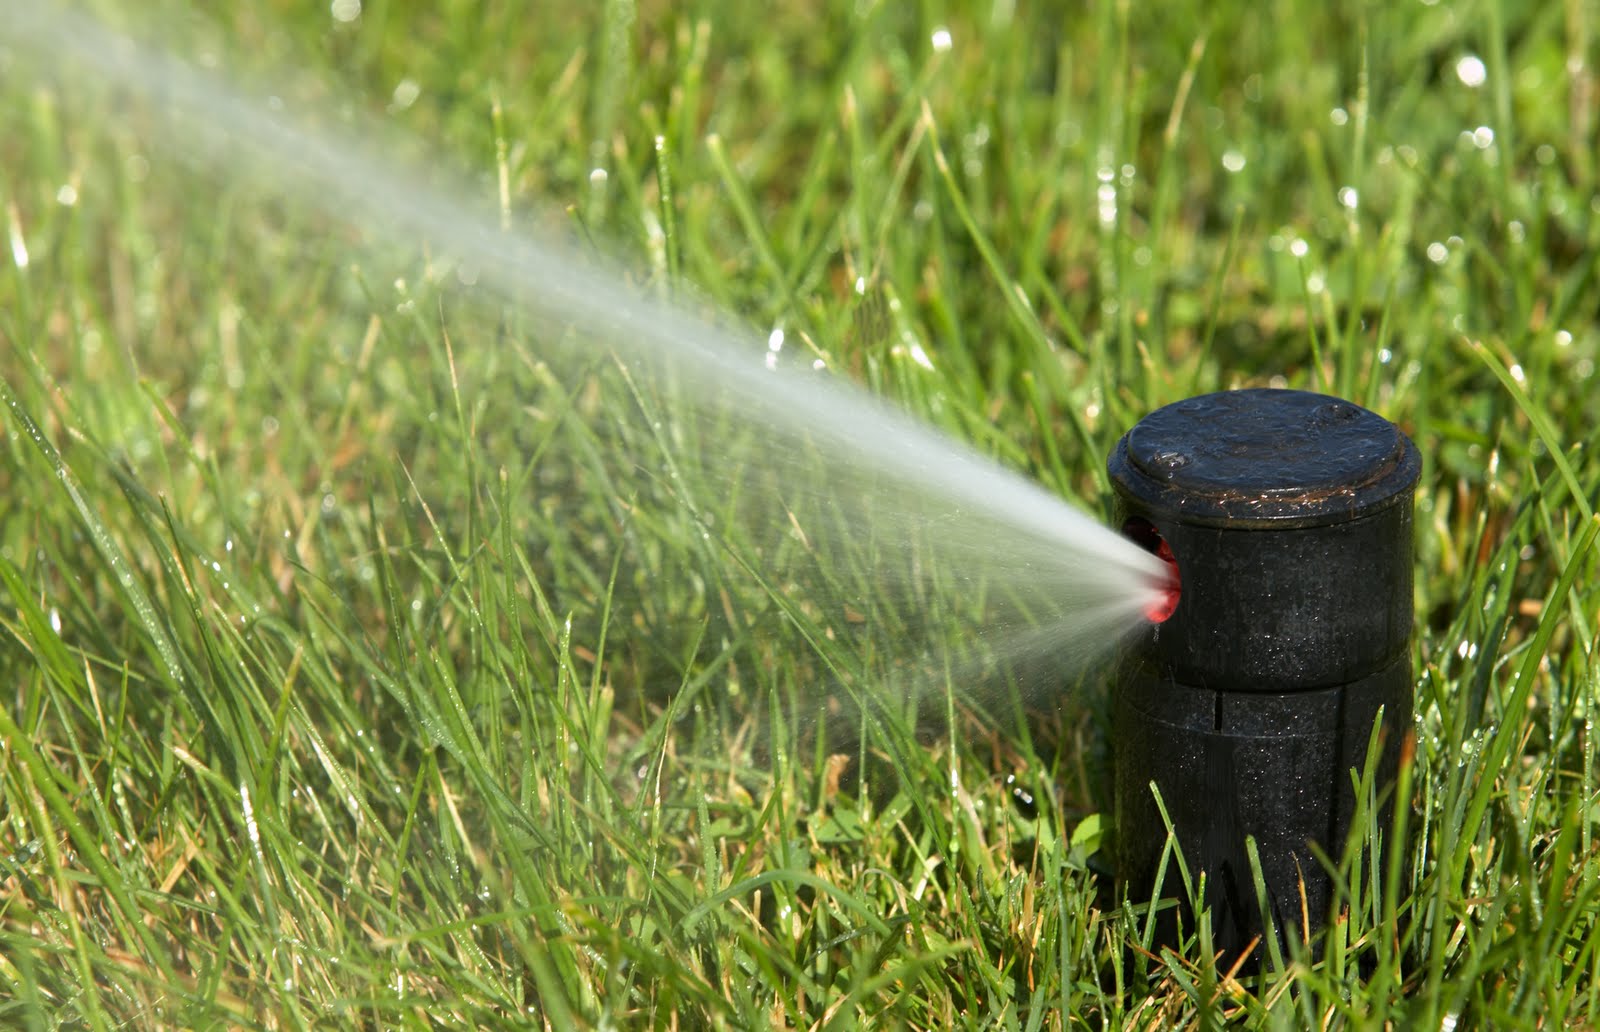   Irrigation System Maintenance    Find Out More  